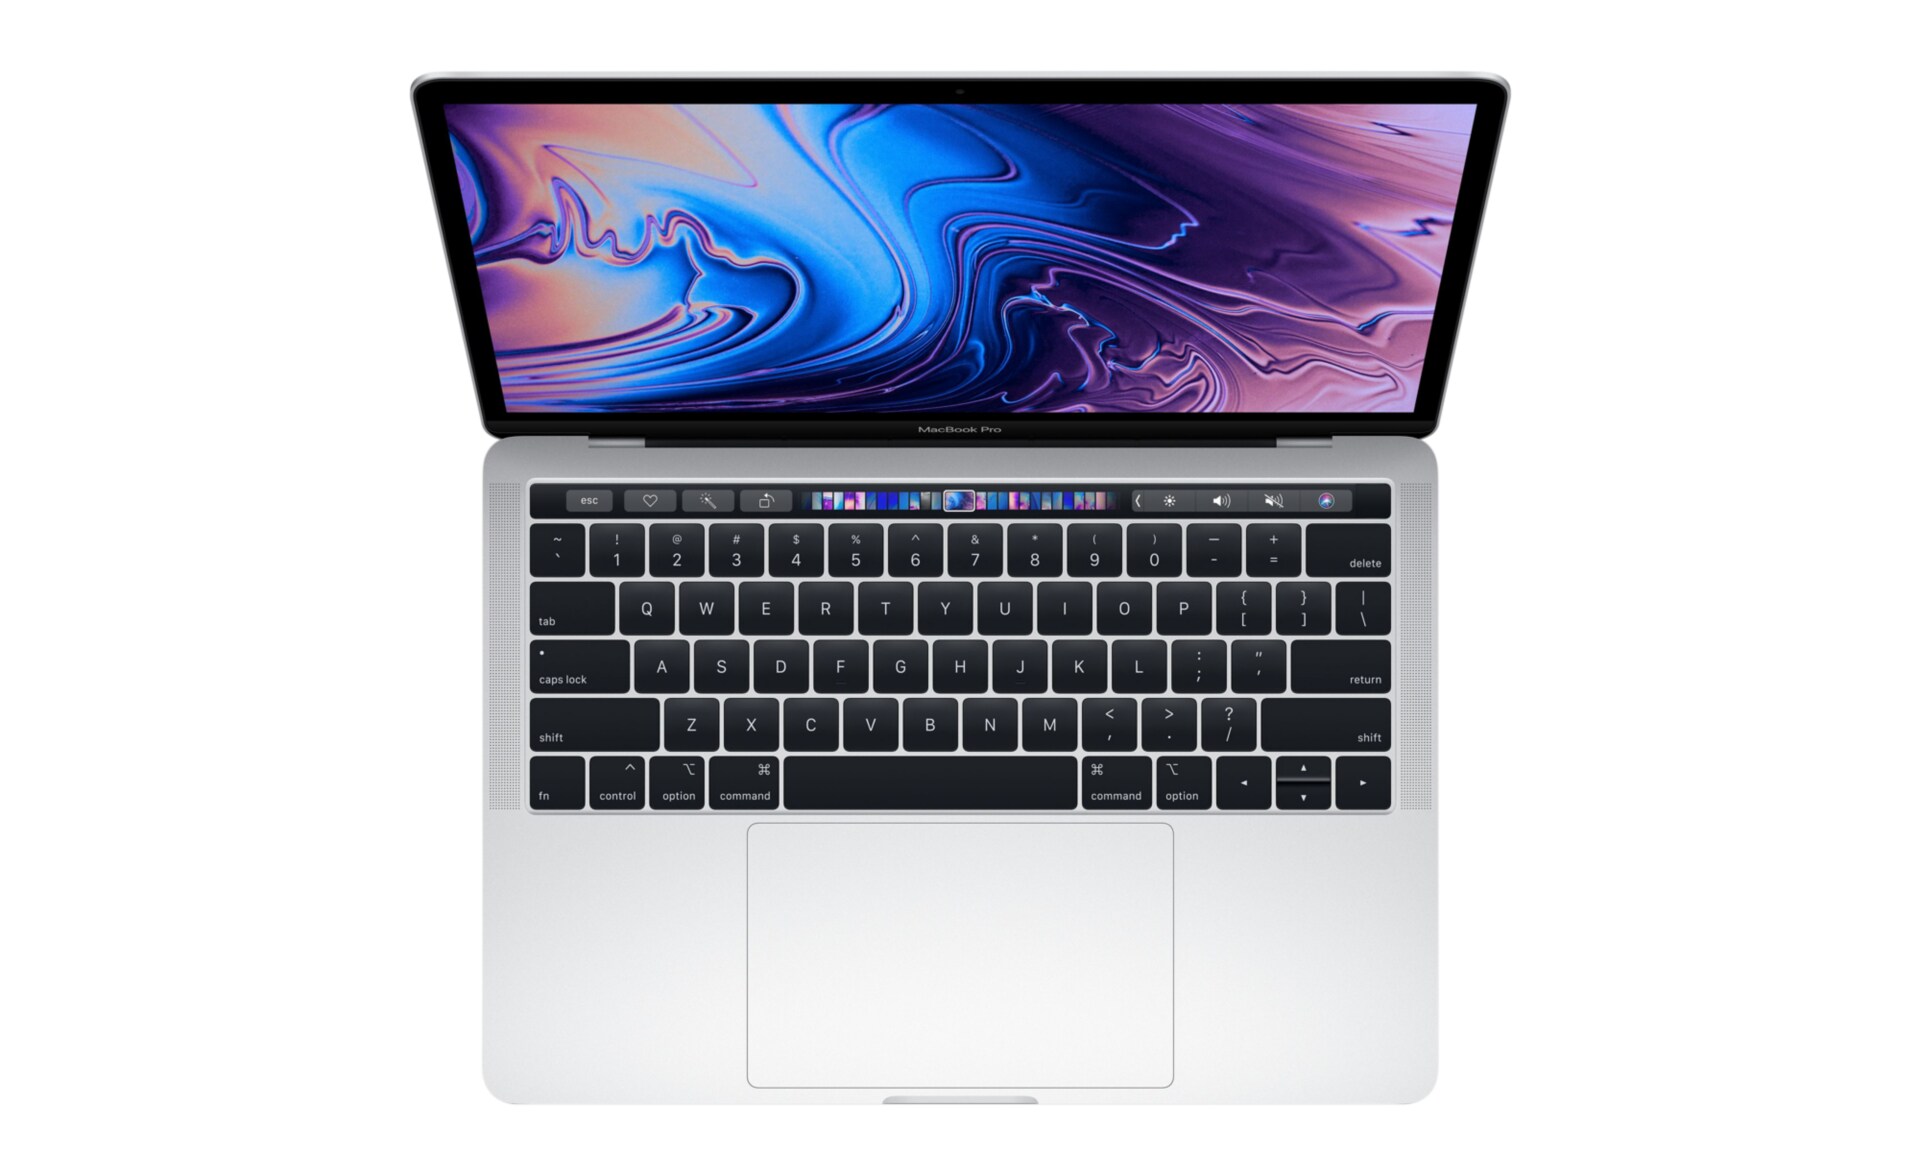 Apple MacBook Pro 13" Core i5 1.4GHz 16GB 128GB - Touch Bar - Silver